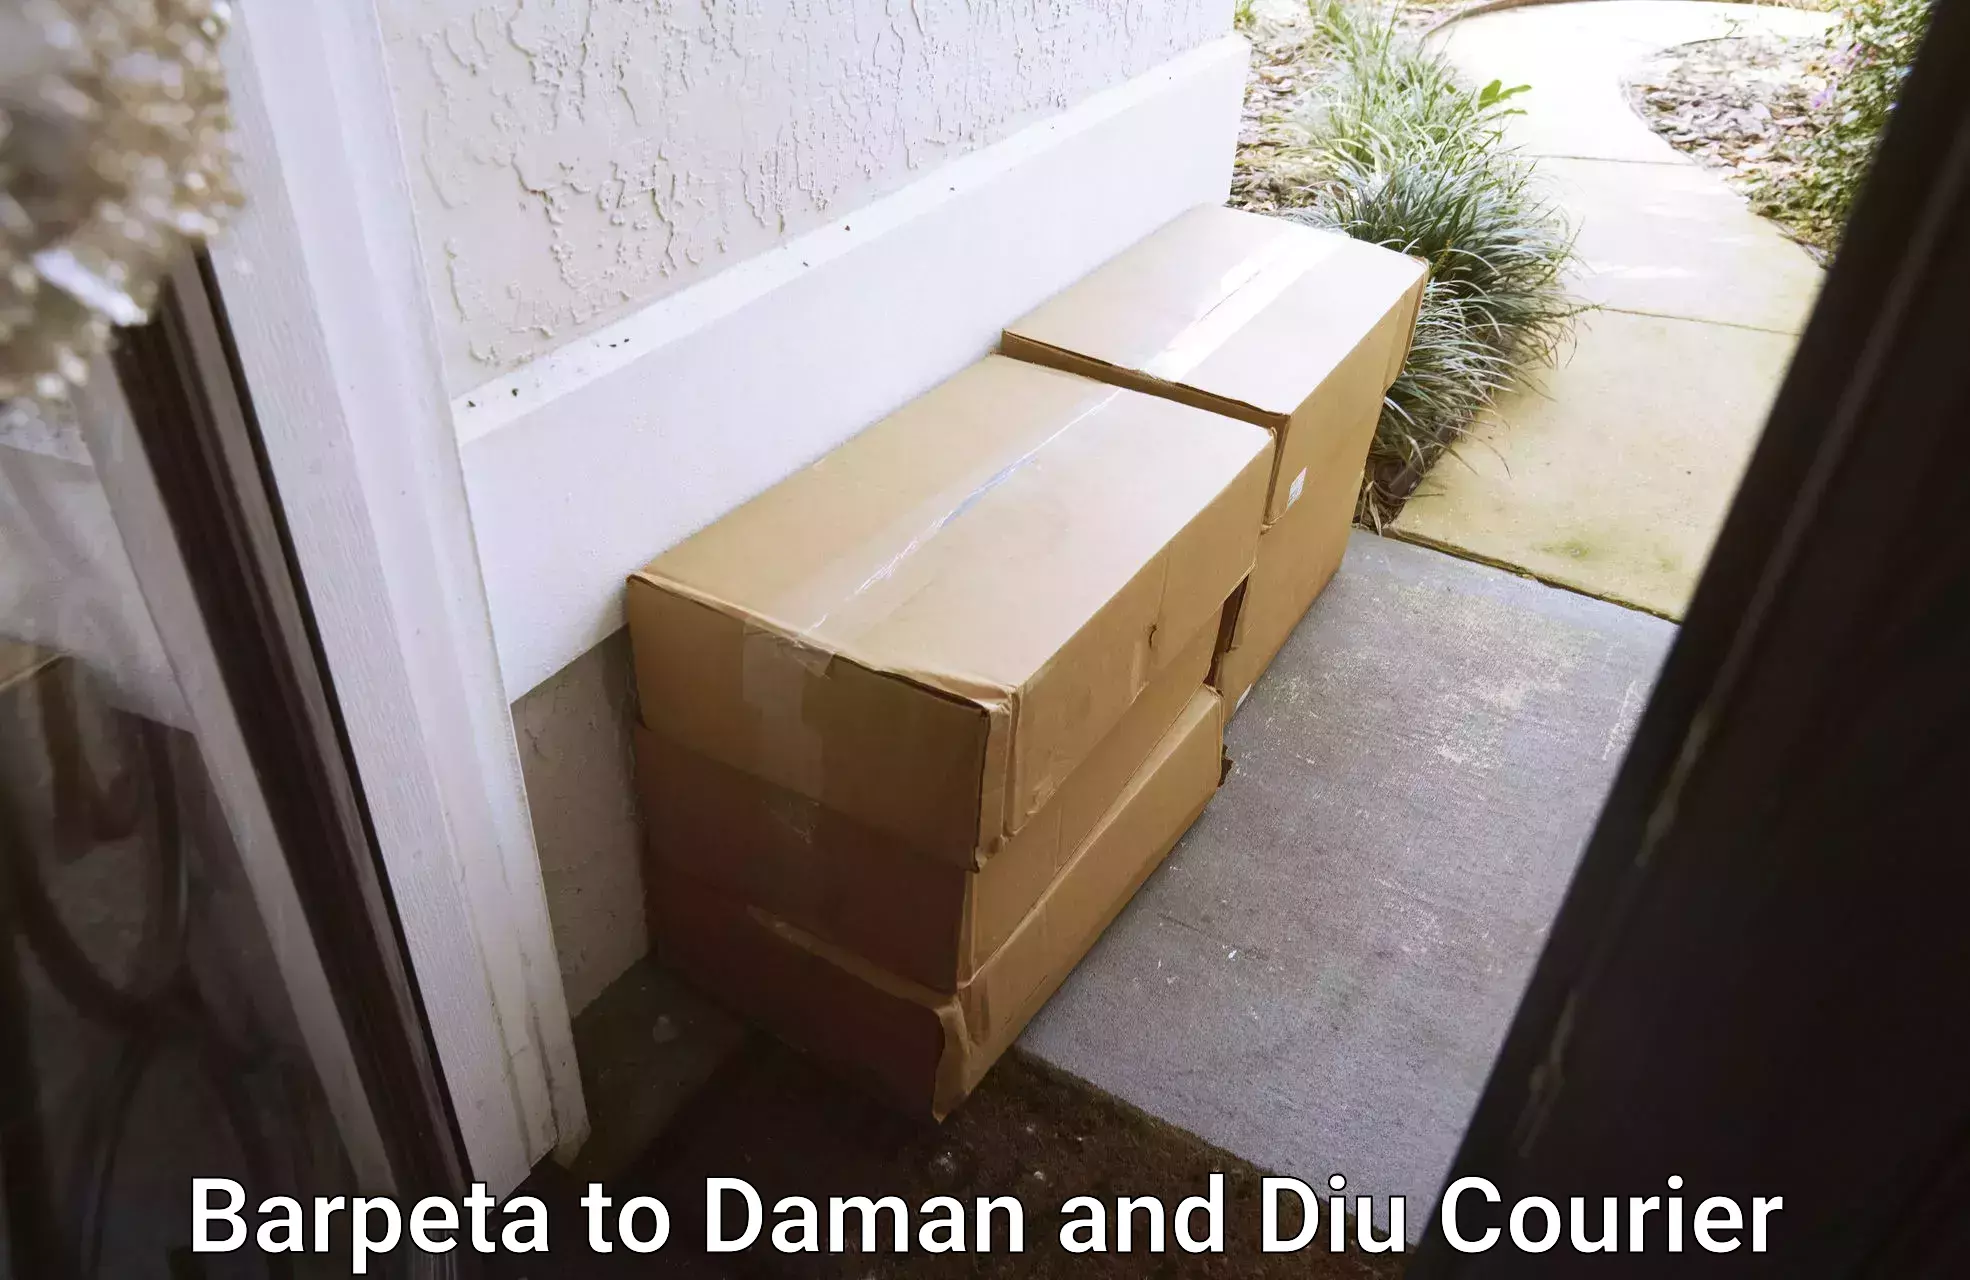 State-of-the-art courier technology Barpeta to Daman